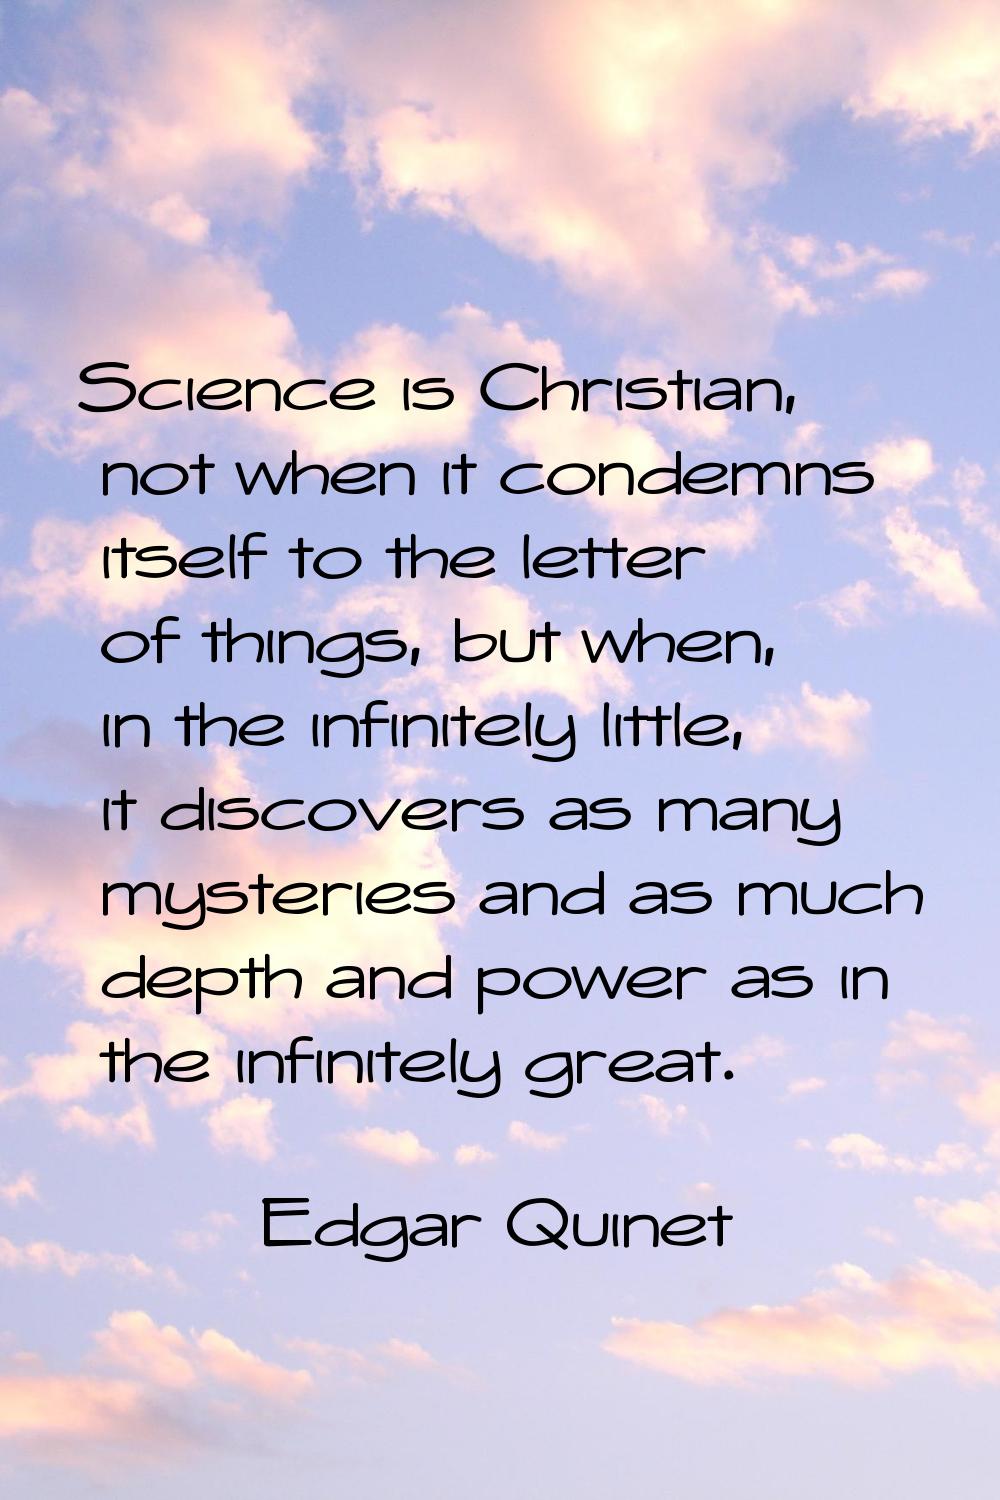 Science is Christian, not when it condemns itself to the letter of things, but when, in the infinit